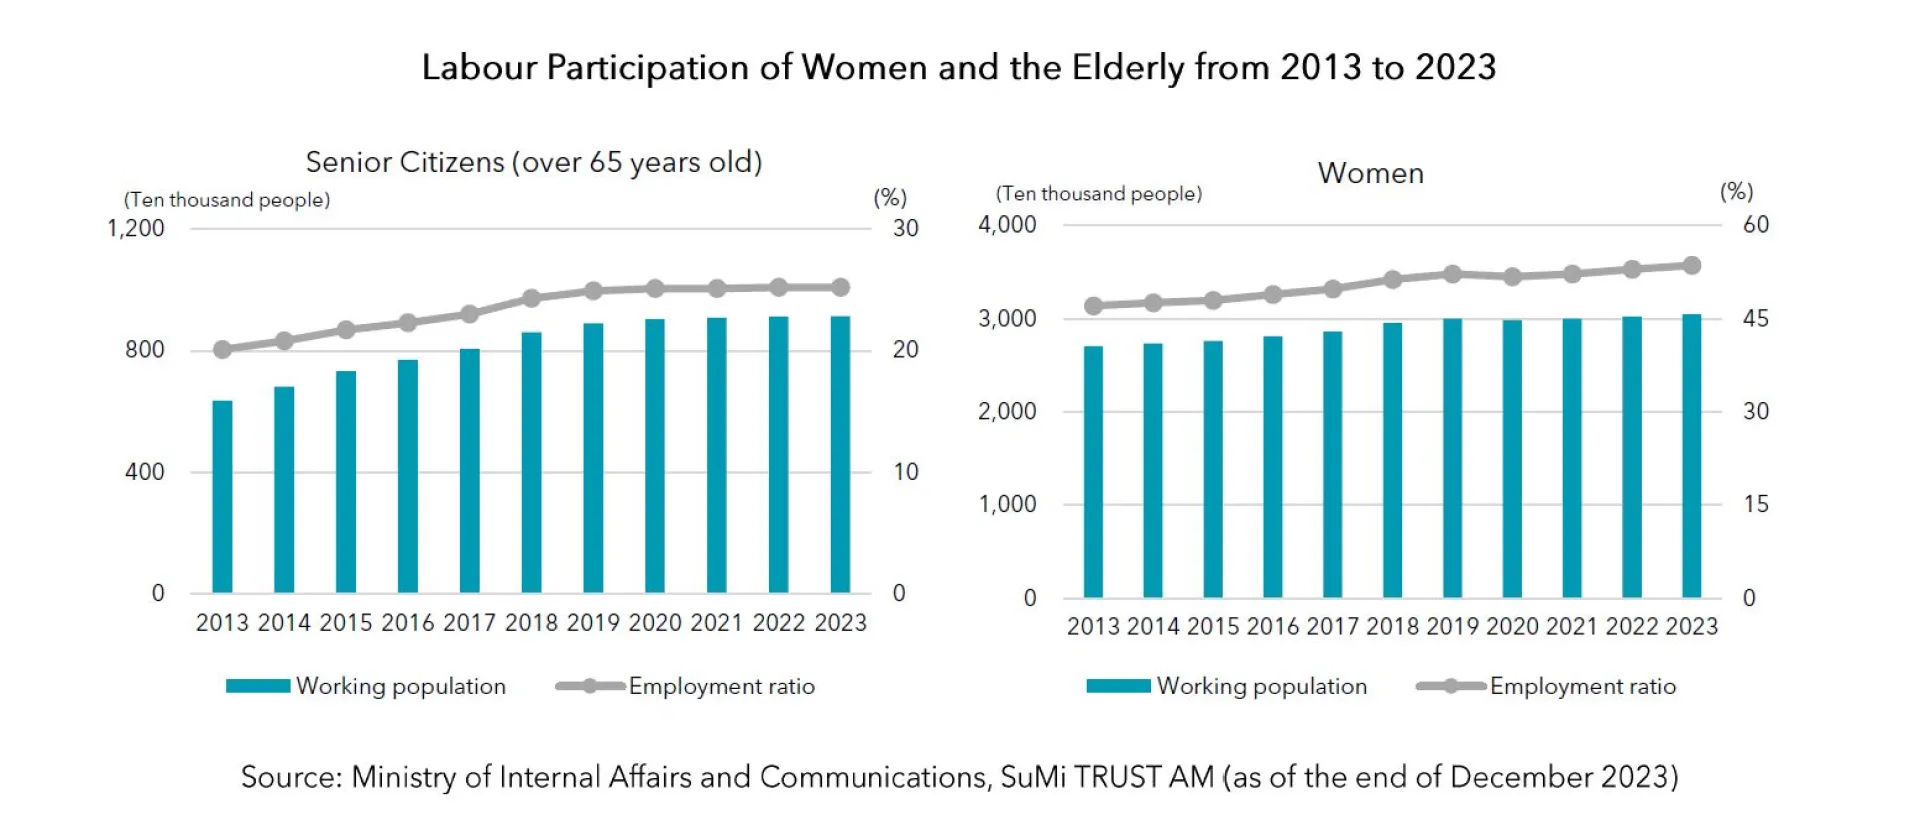 Labour Participation of Women and the Elderly from 2013 to 2023